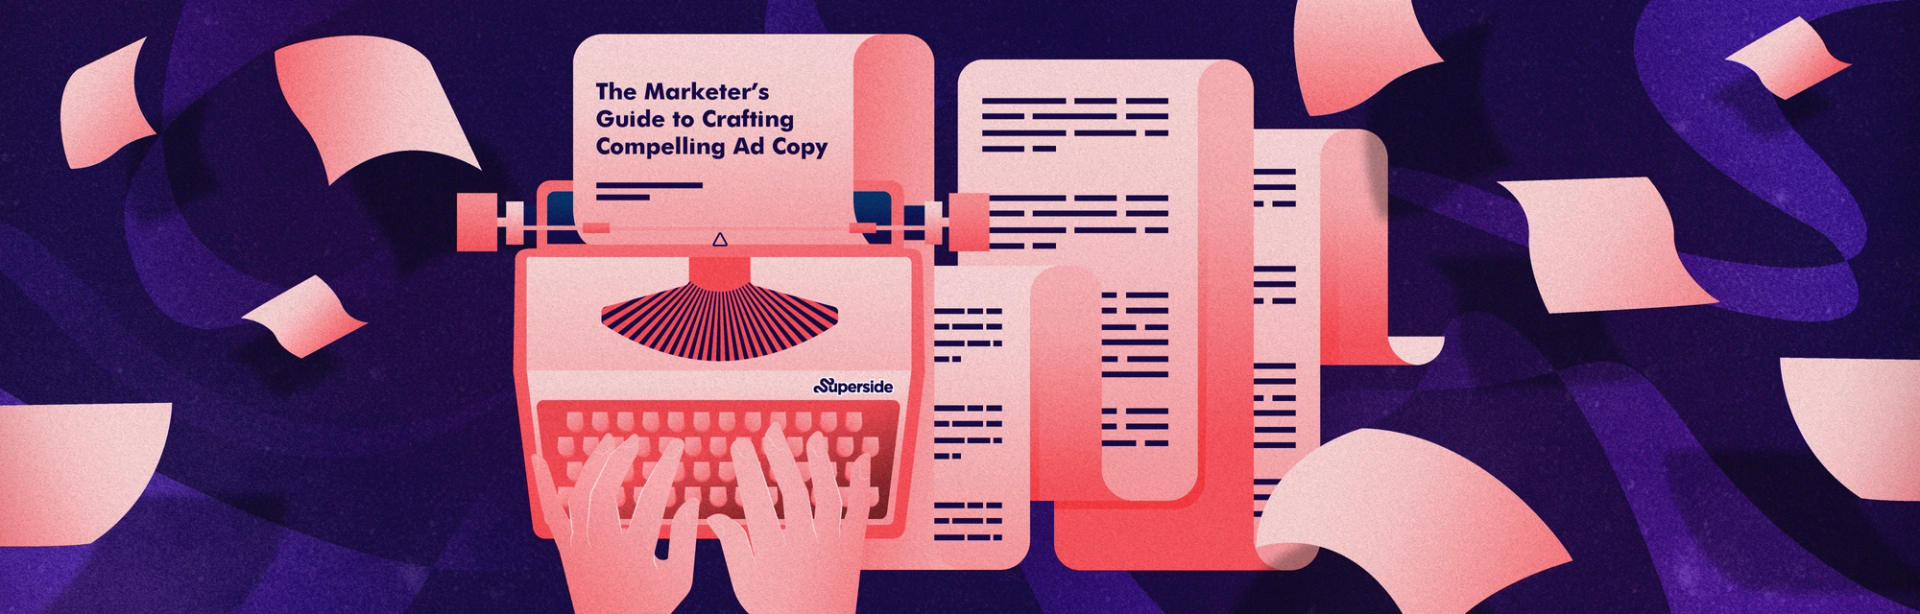 The Marketer’s Guide to Crafting Compelling Ad Copy